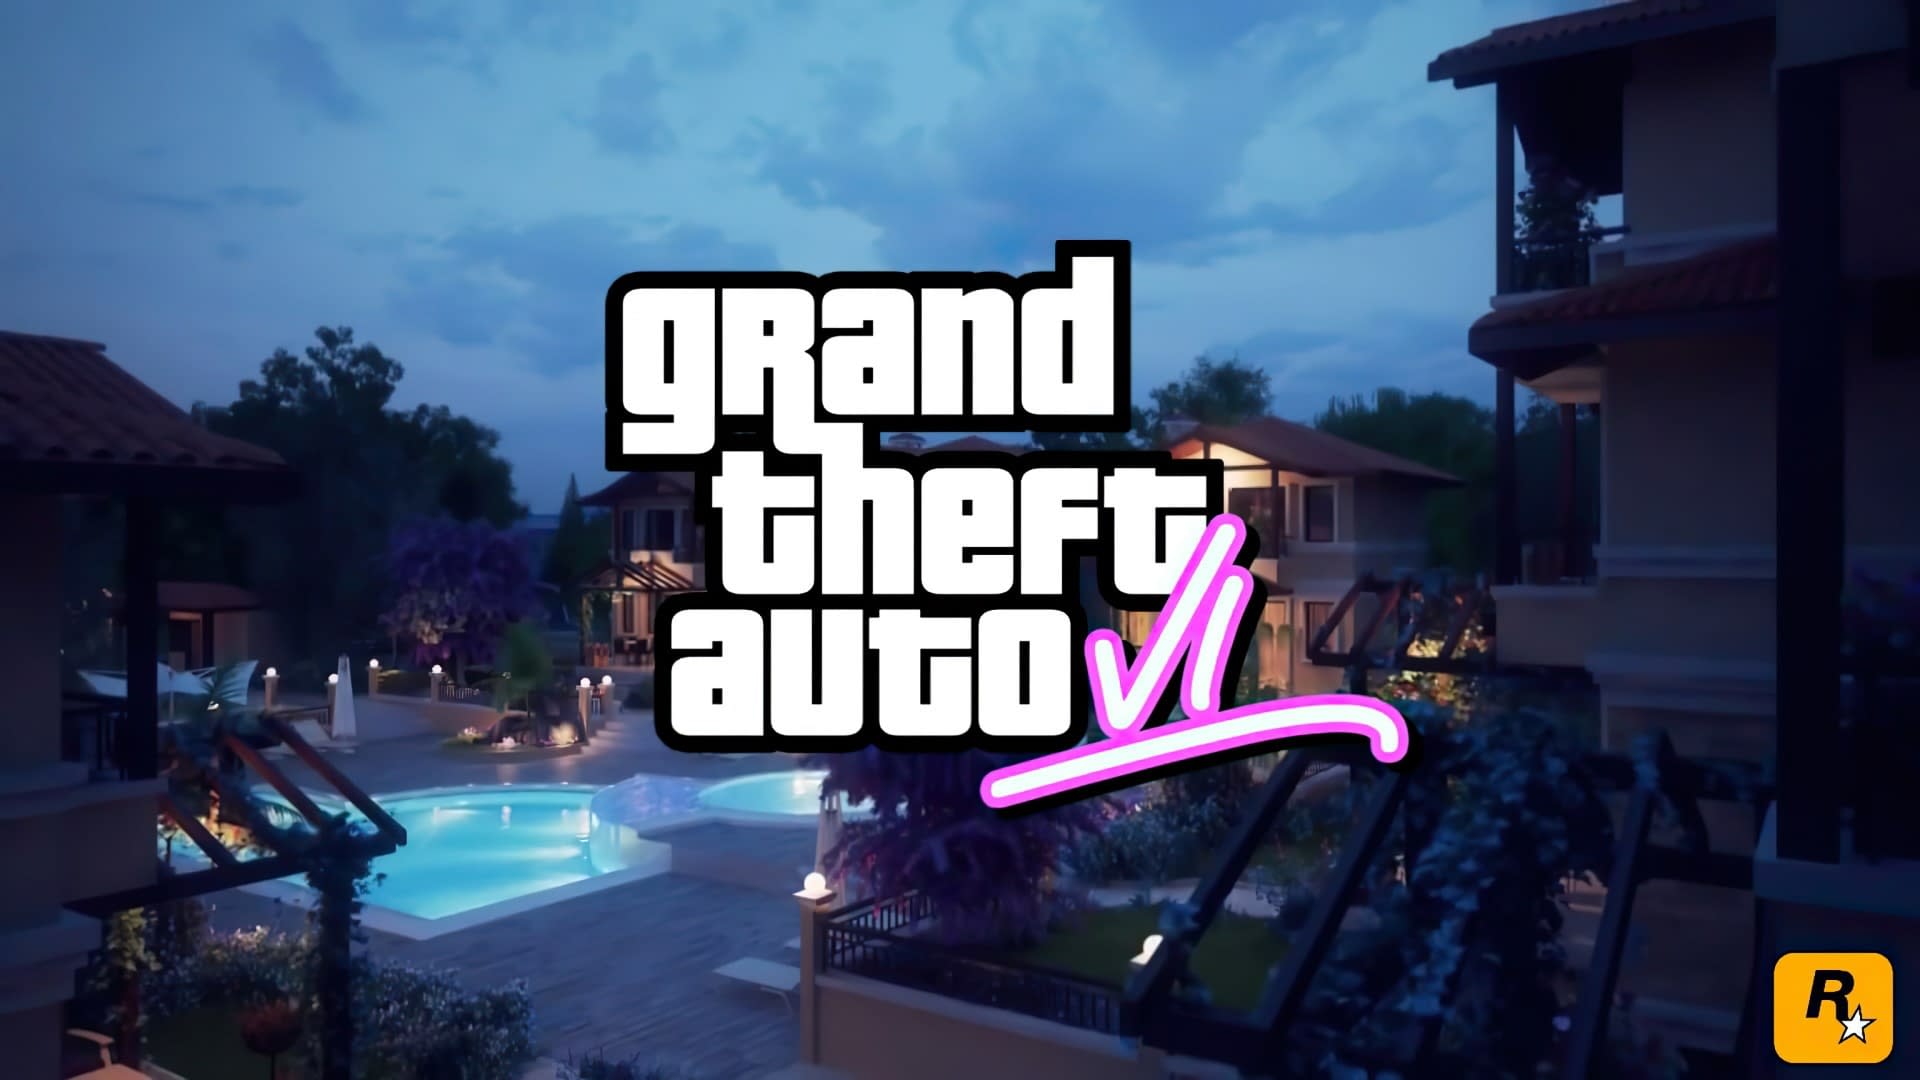 GTA 6’s Video Leaked to Show Vice City Zone!